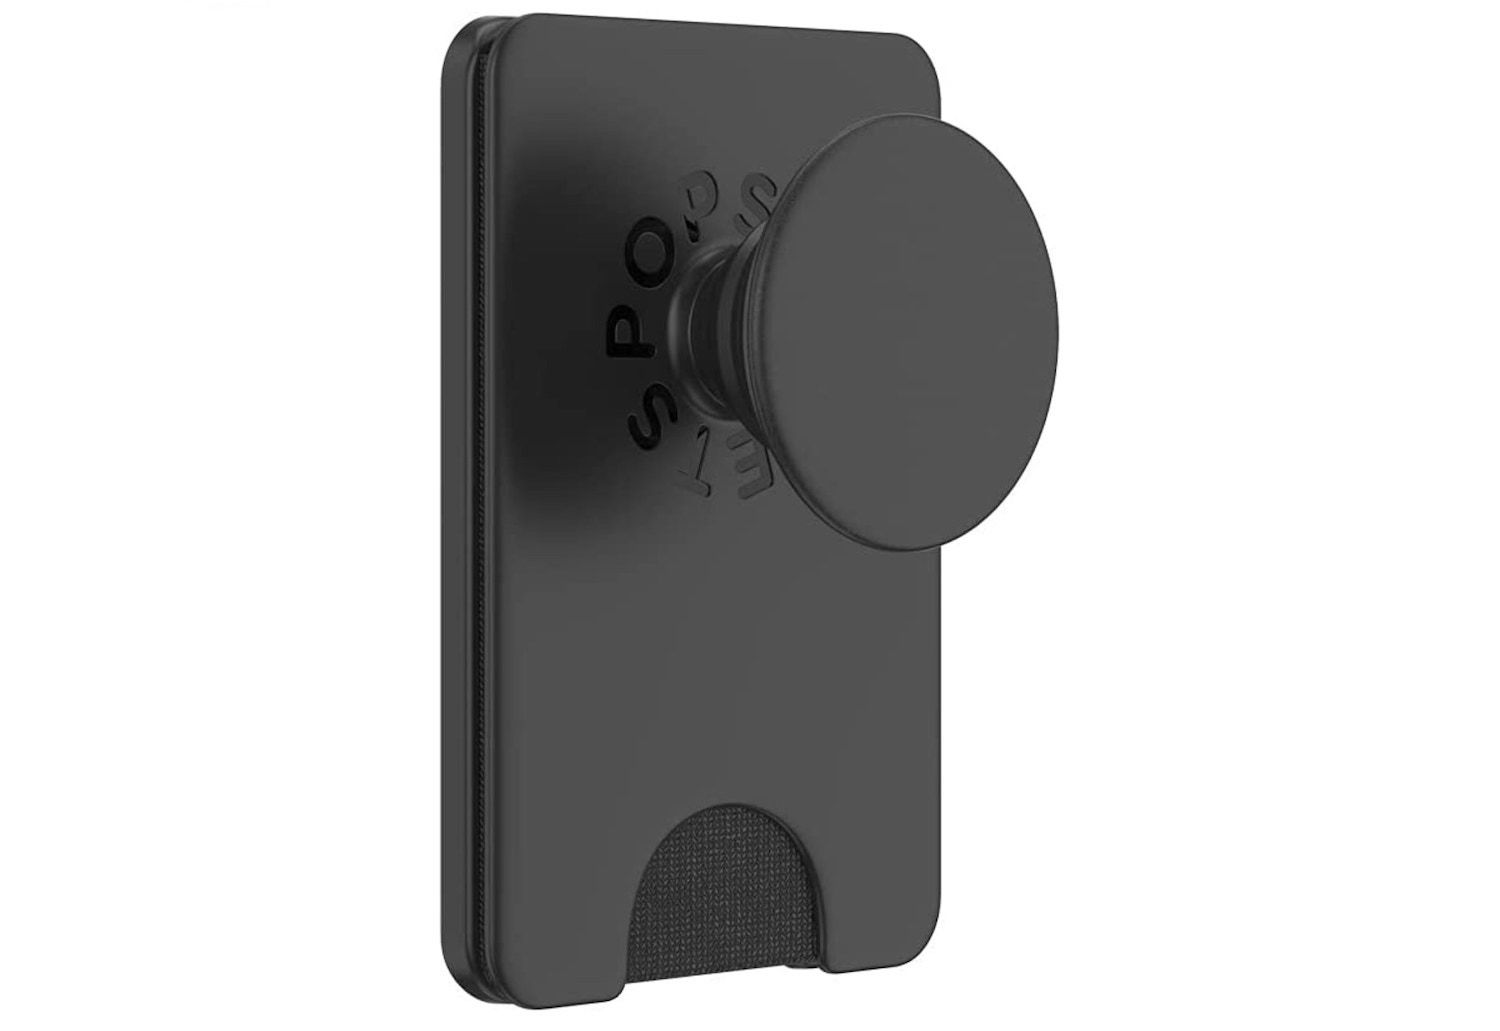 PopSockets MagSafe wallet with expanding grip